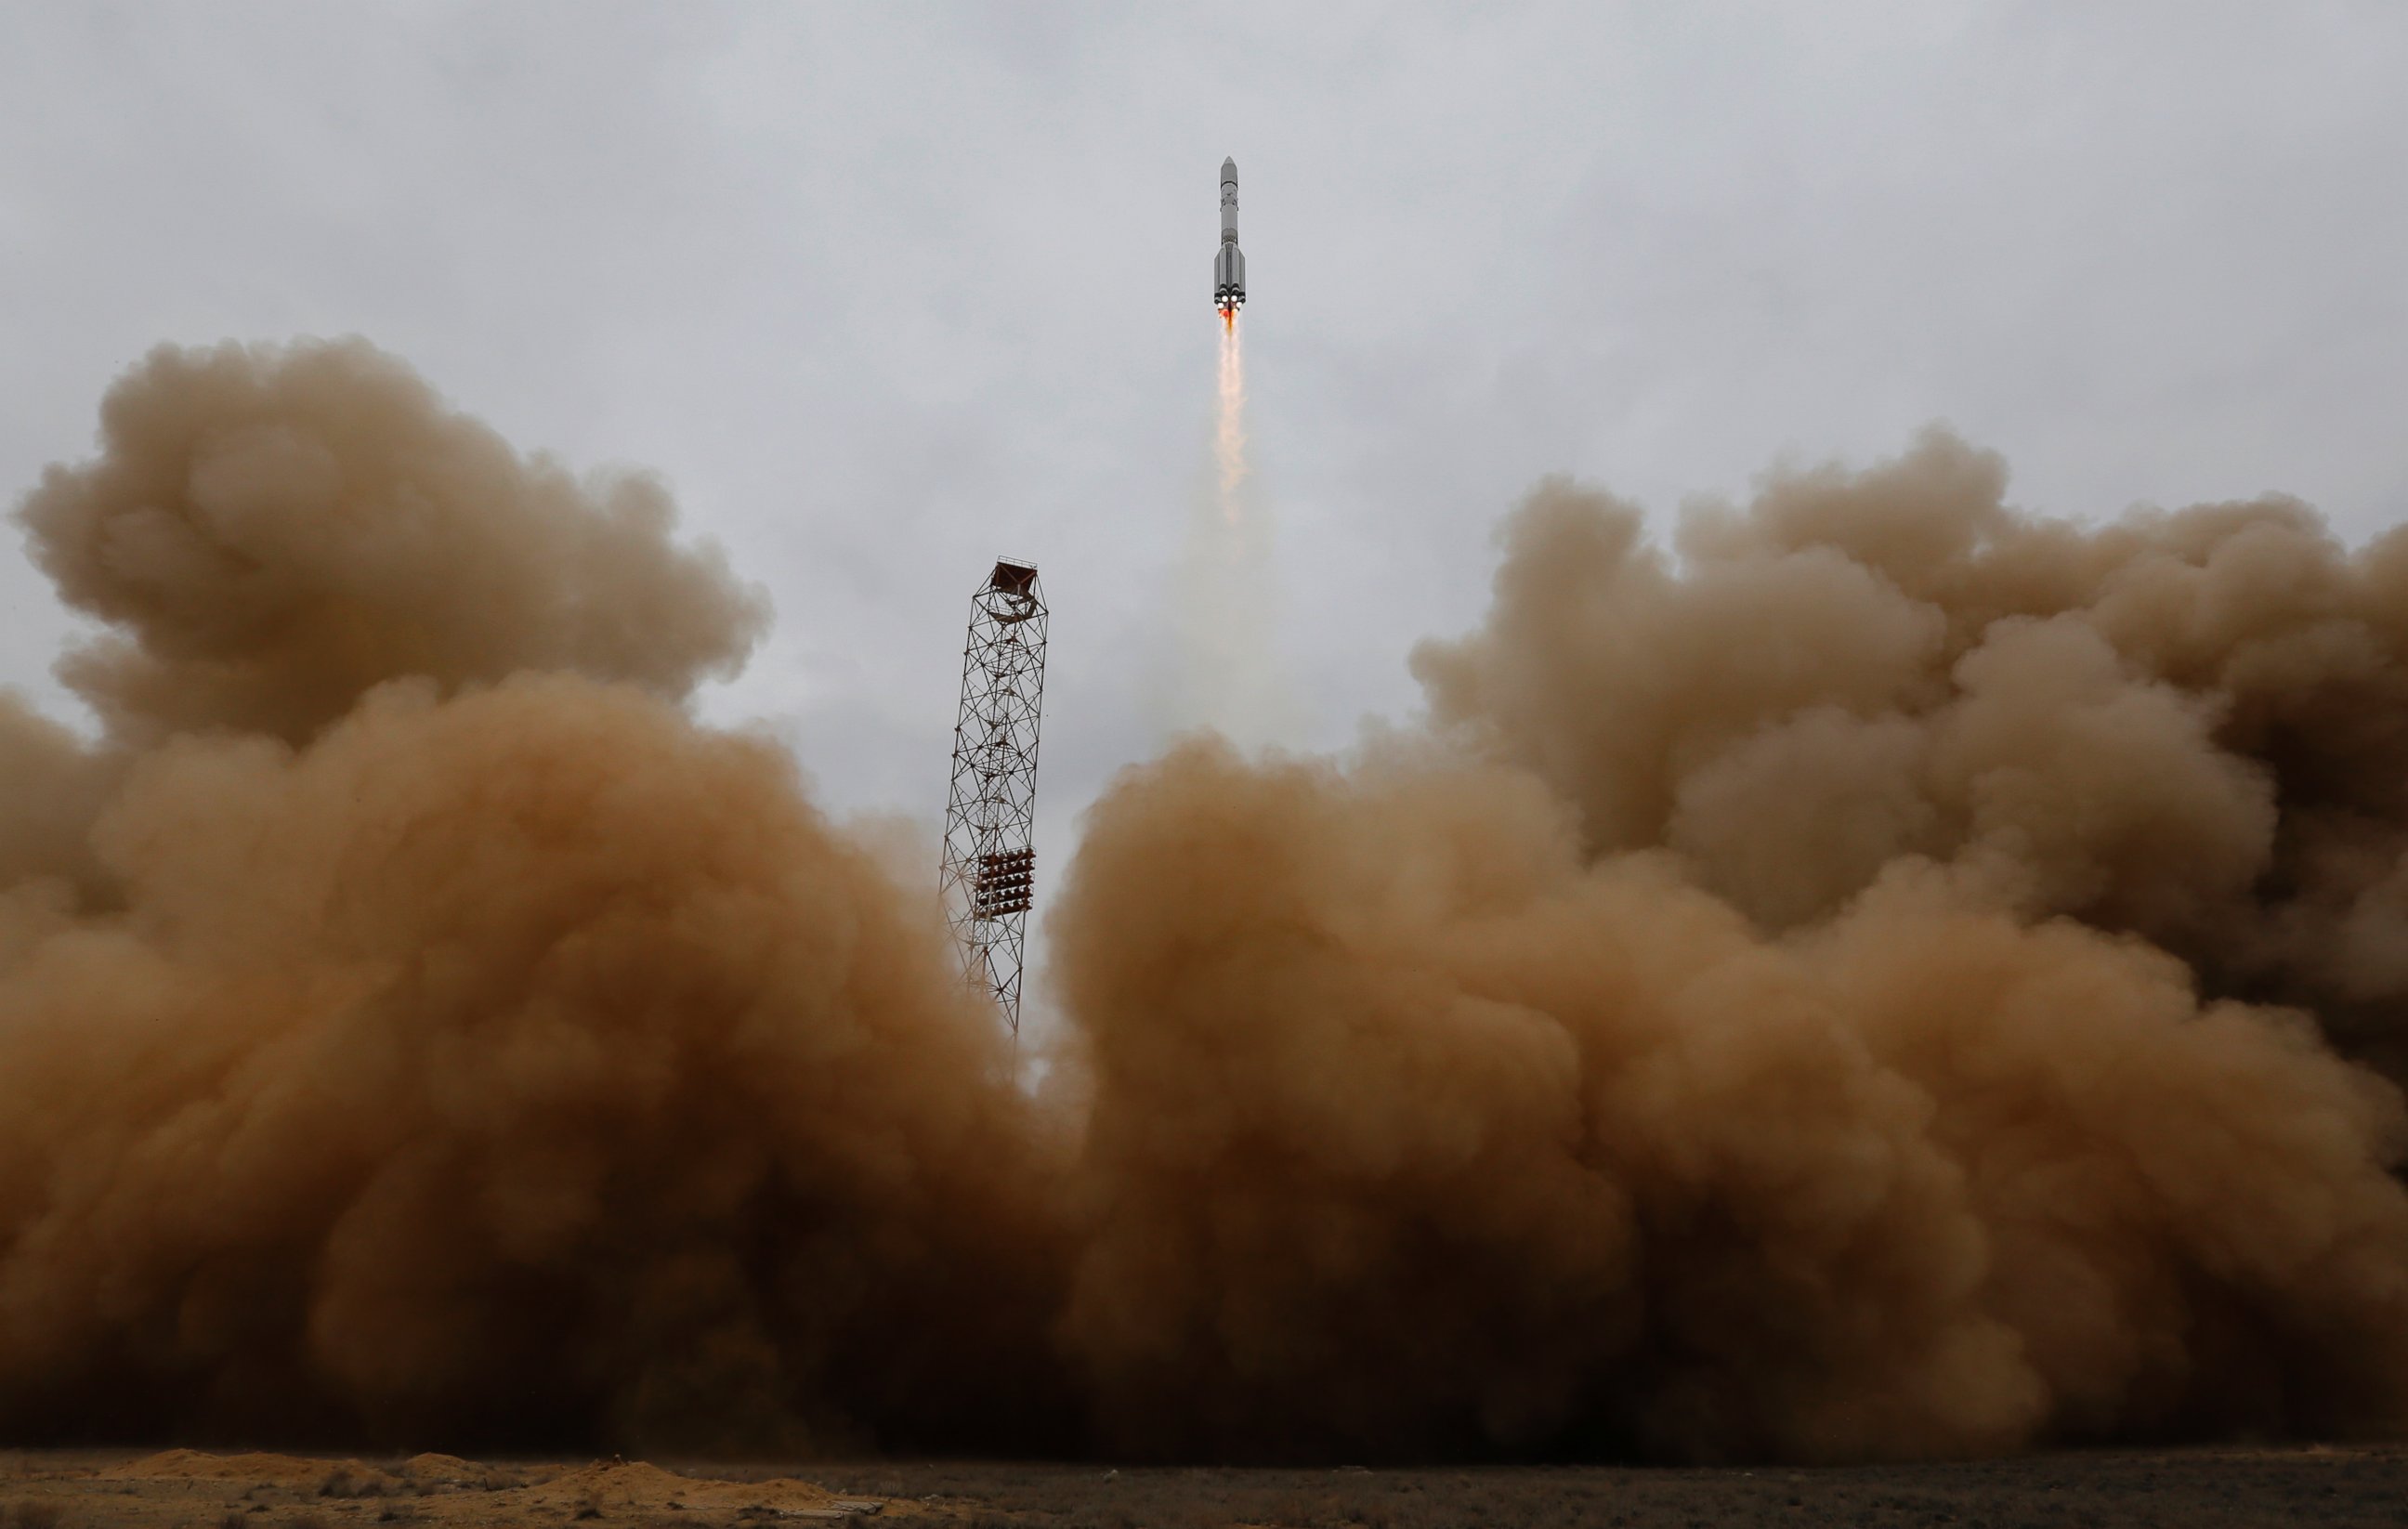 PHOTO: The Proton-M rocket booster blasts off at the Russian leased Baikonur cosmodrome, Kazakhstan on March 14, 2016. 